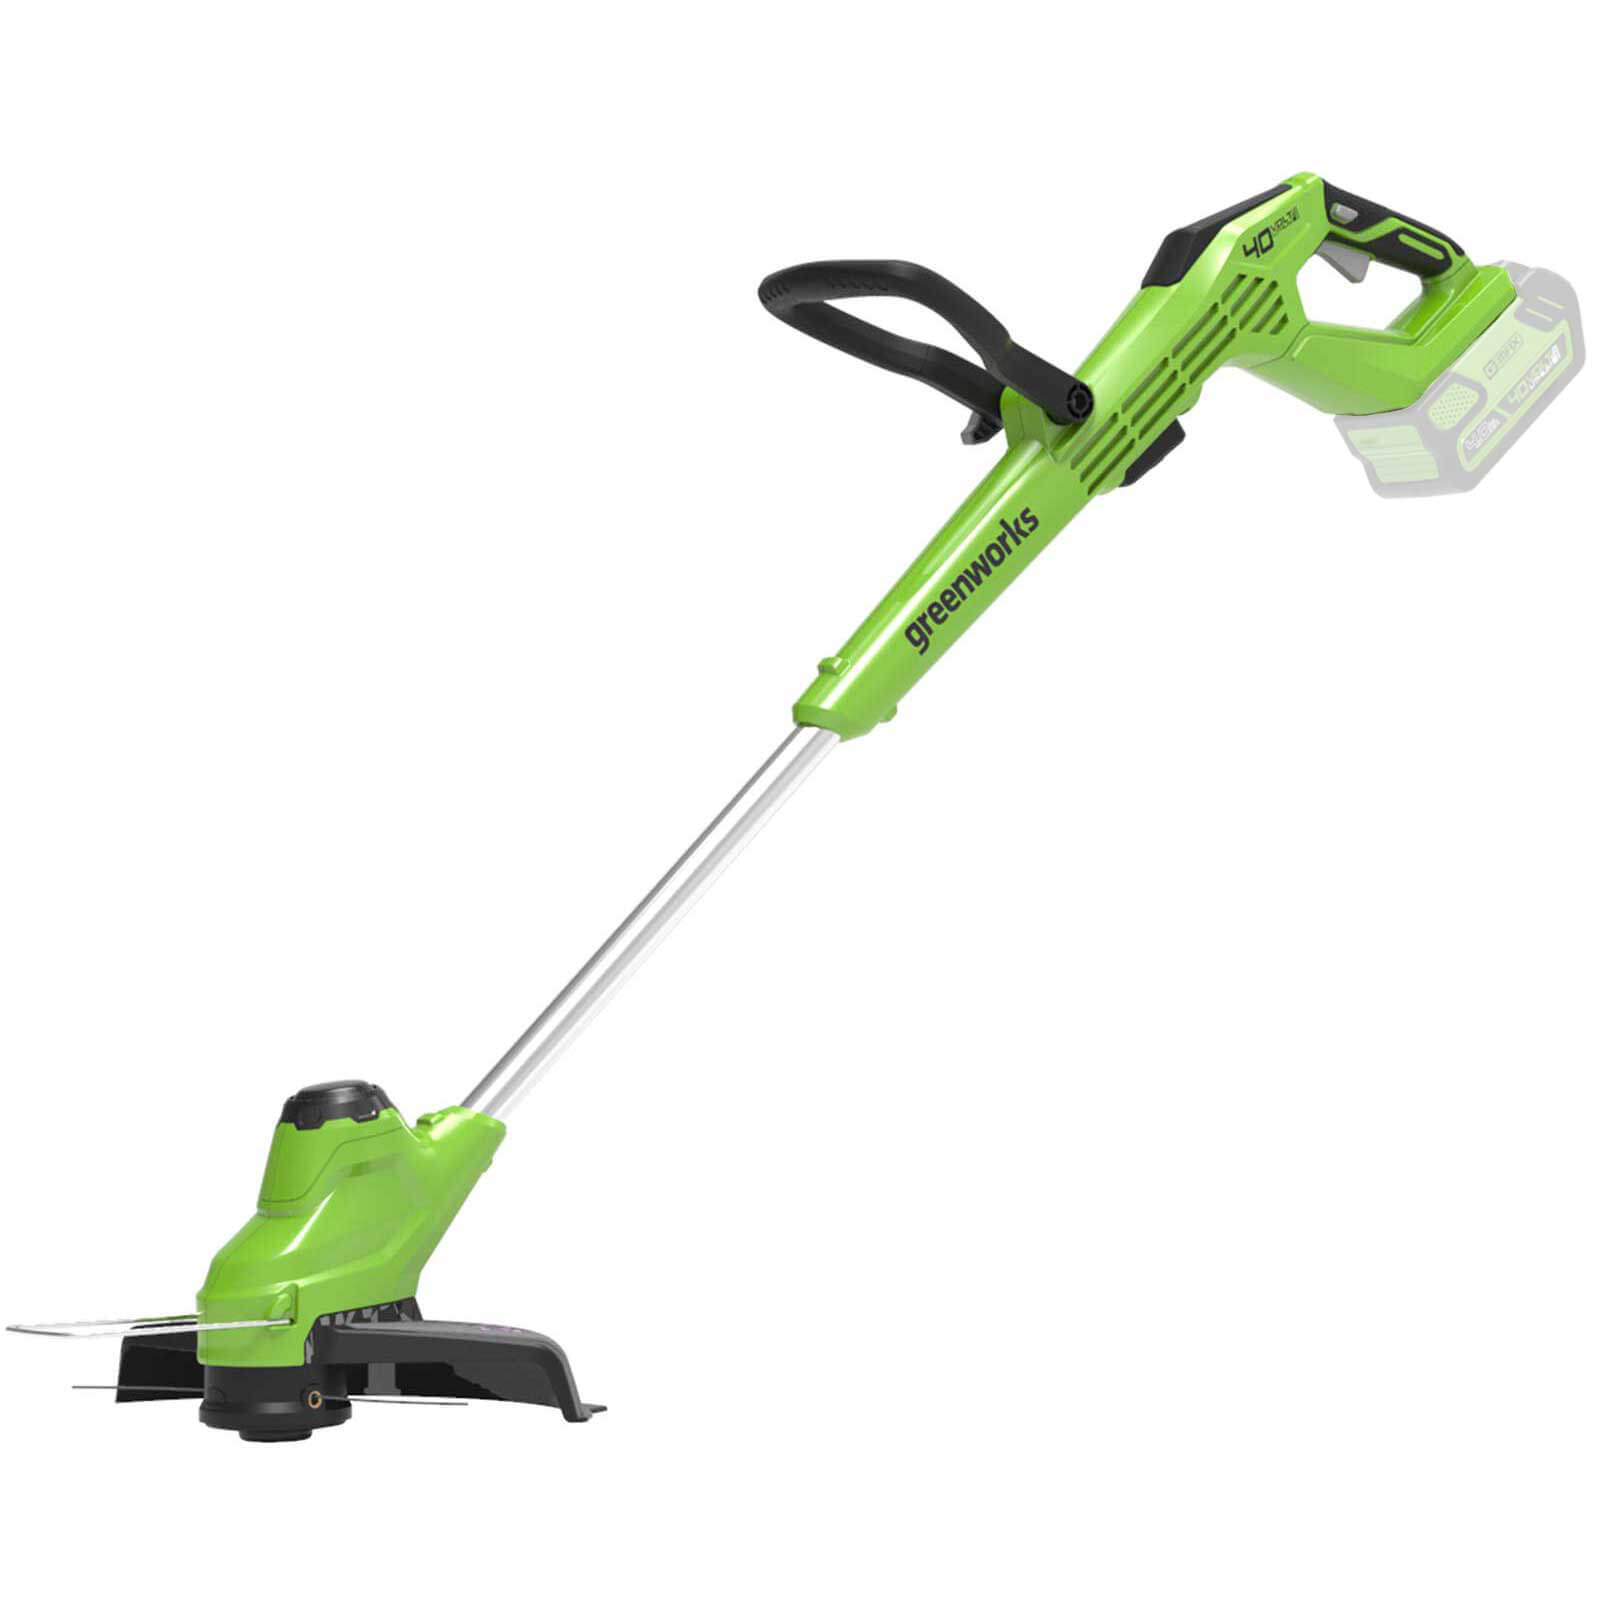 Image of Greenworks G40T5 40v Cordless Grass Trimmer and Edger 300mm No Batteries No Charger